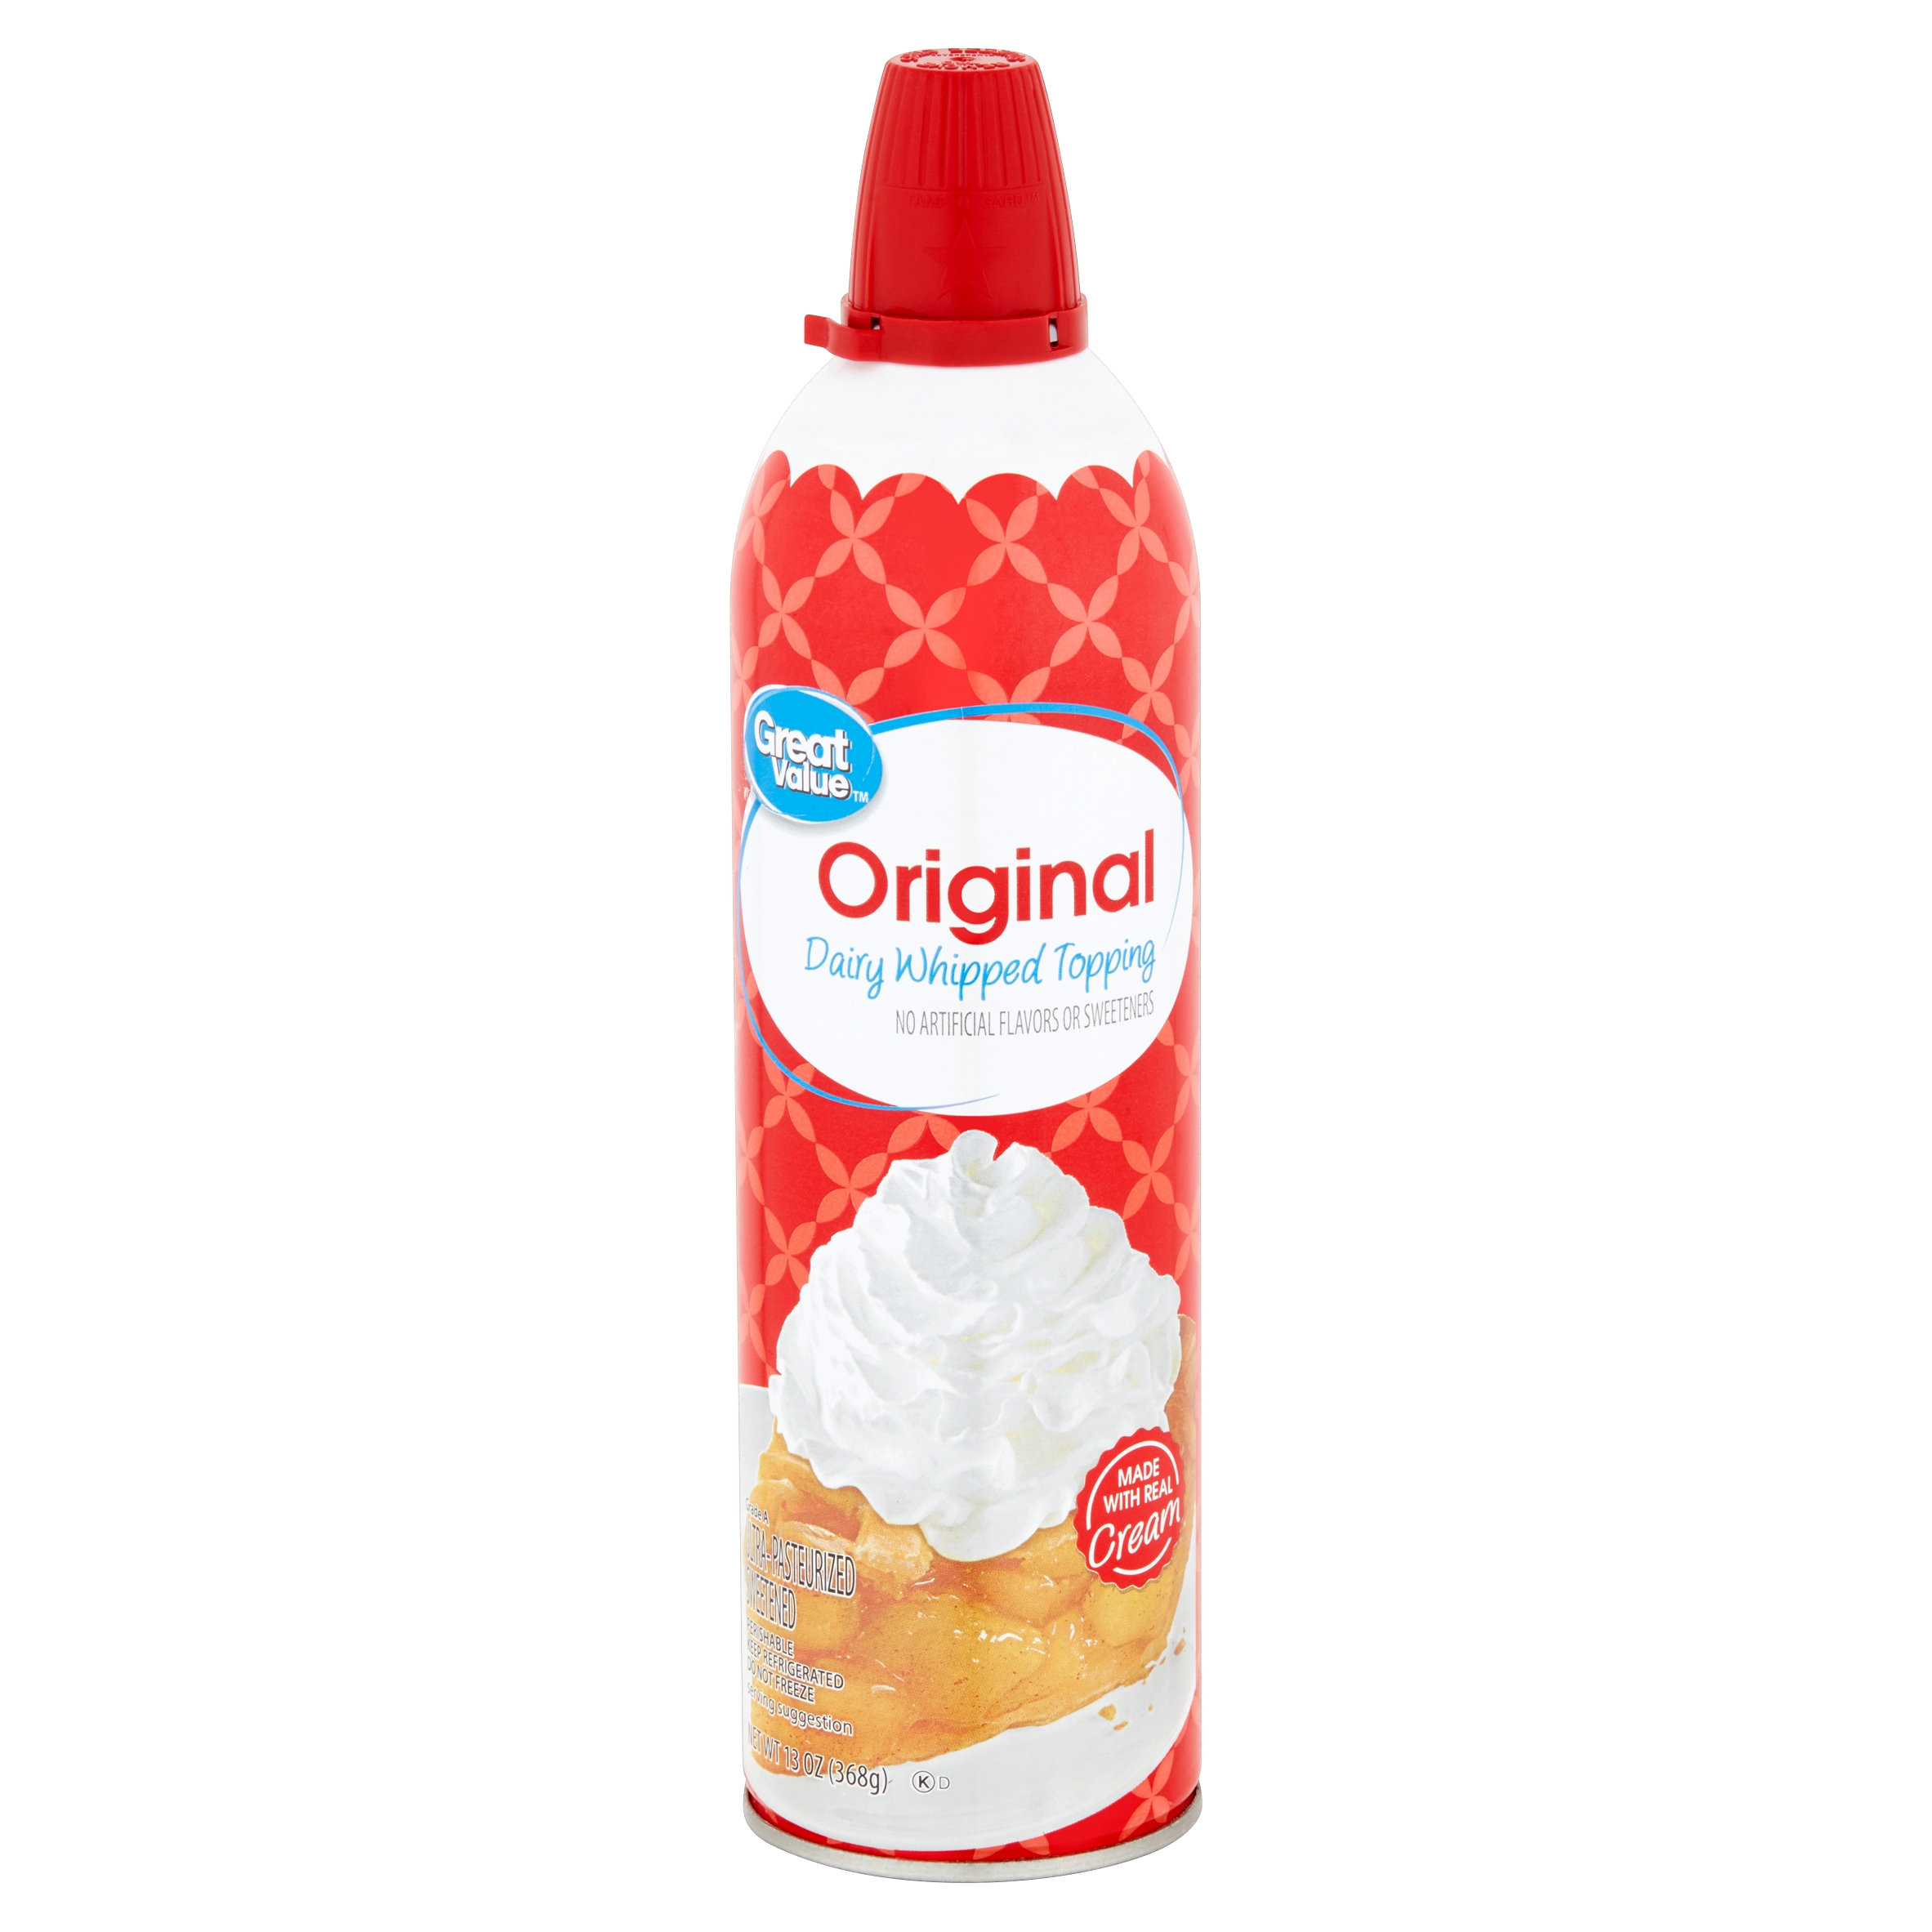 Great Value Original Dairy Whipped Topping, 13 Oz